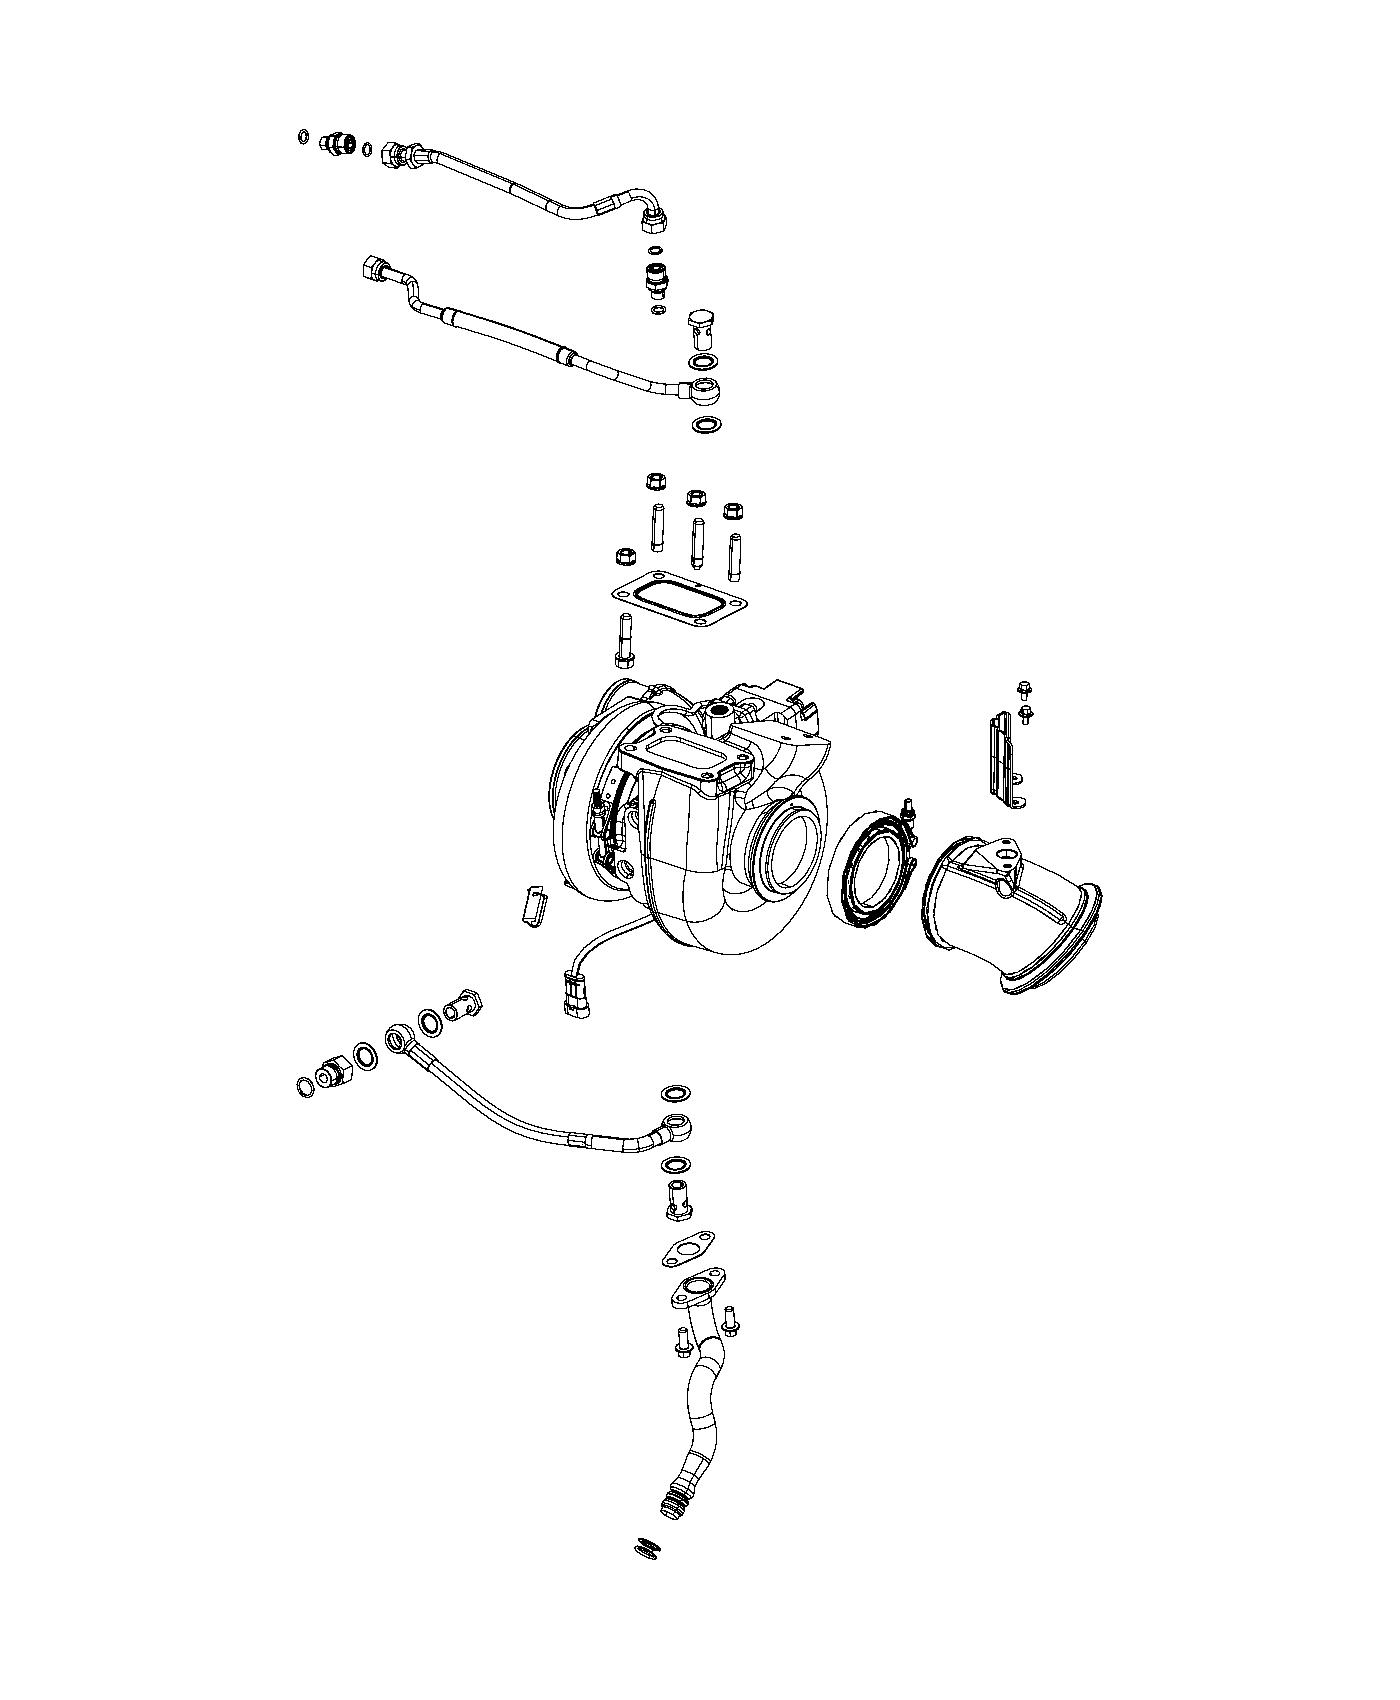 Diagram Turbocharger And Oil Lines/Hoses 6.7L Diesel [6.7L I6 Cummins Turbo Diesel Engine]. for your Ram 4500  